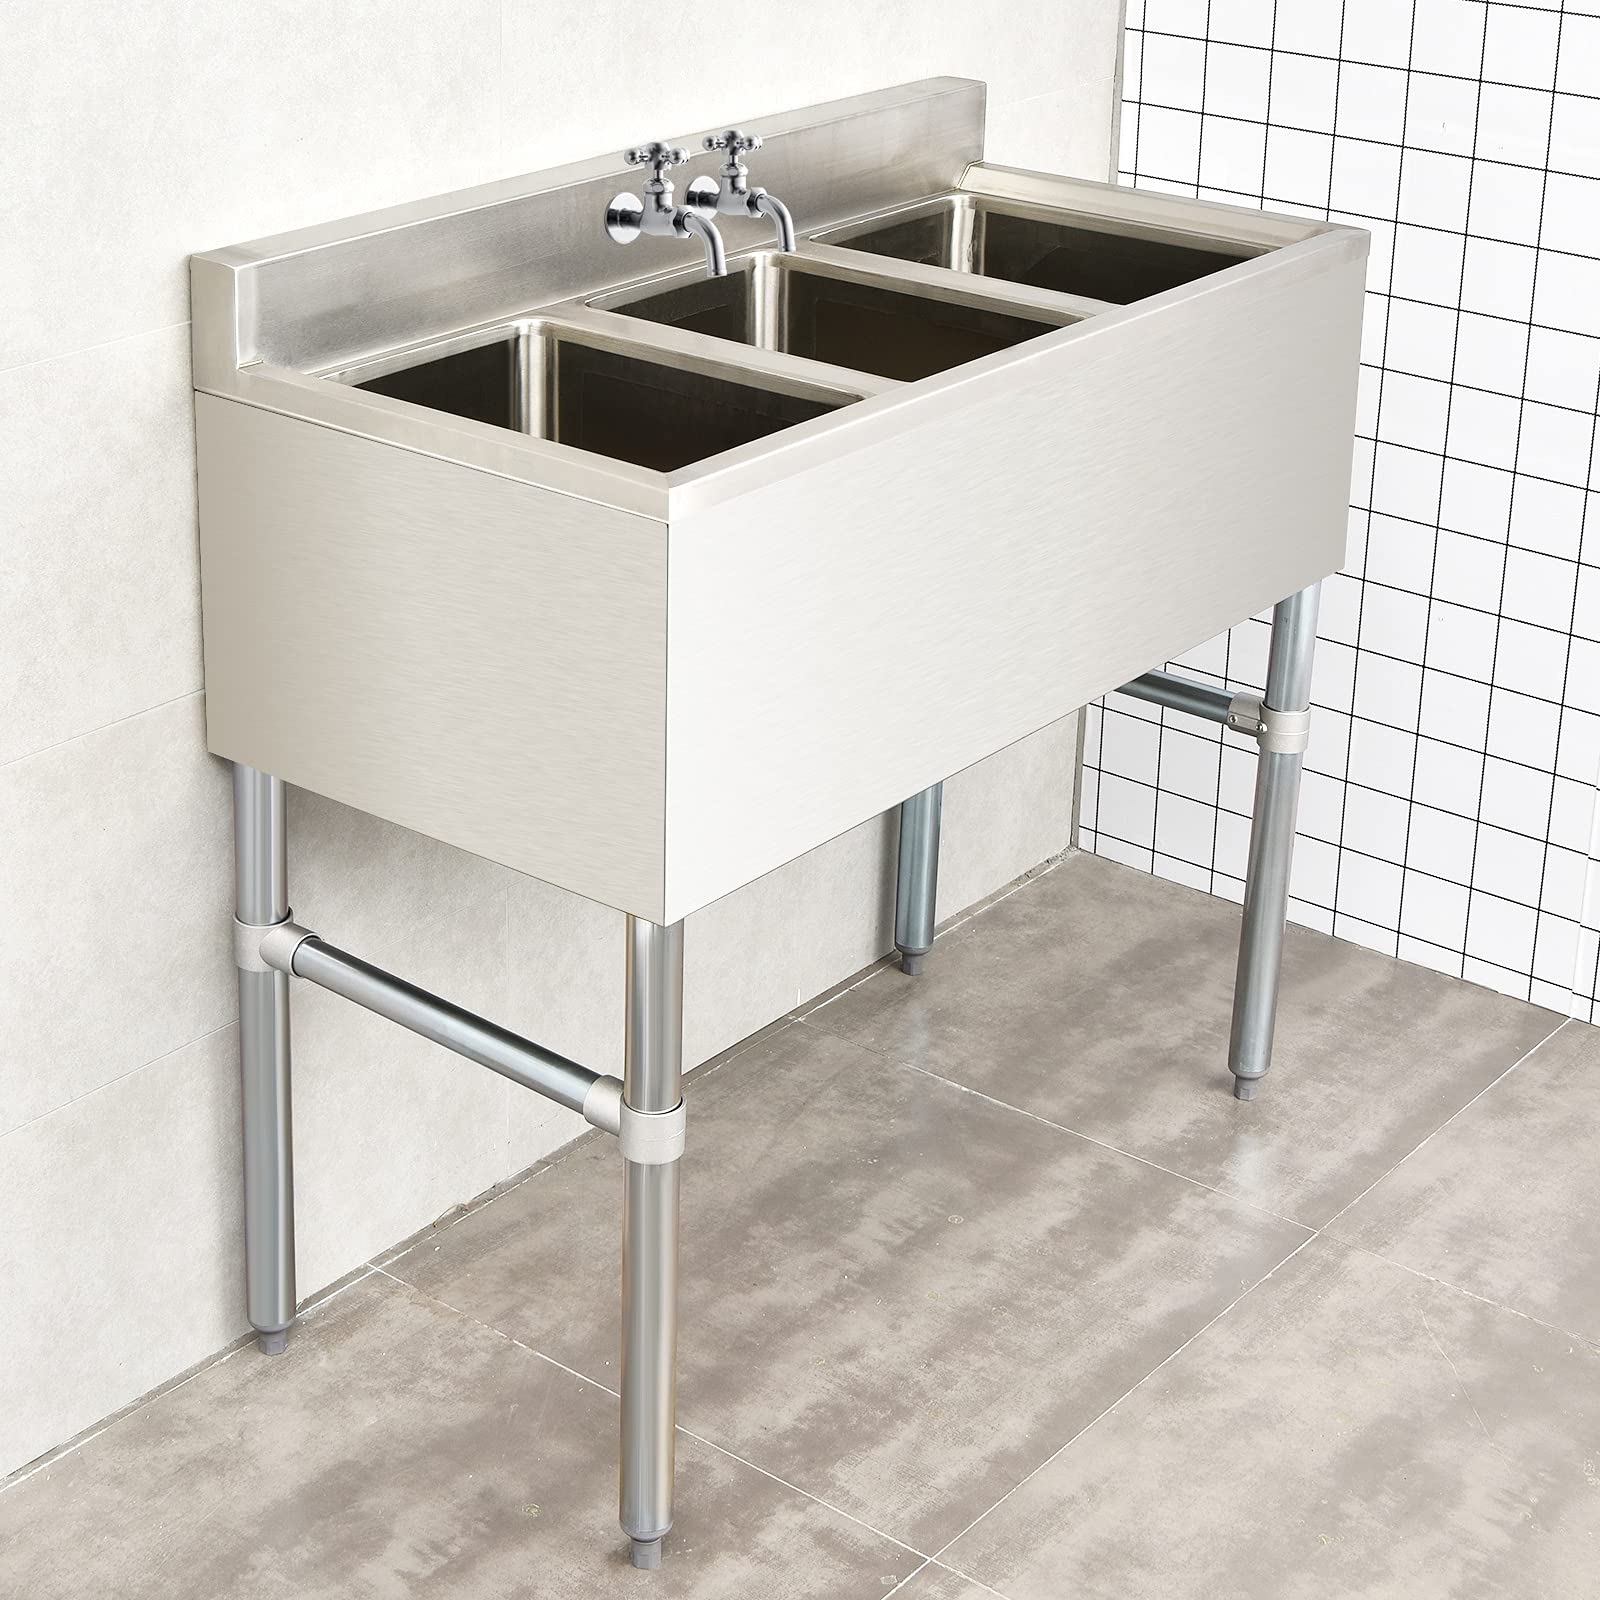 3 Compartment Commercial 304 Stainless Steel Sink